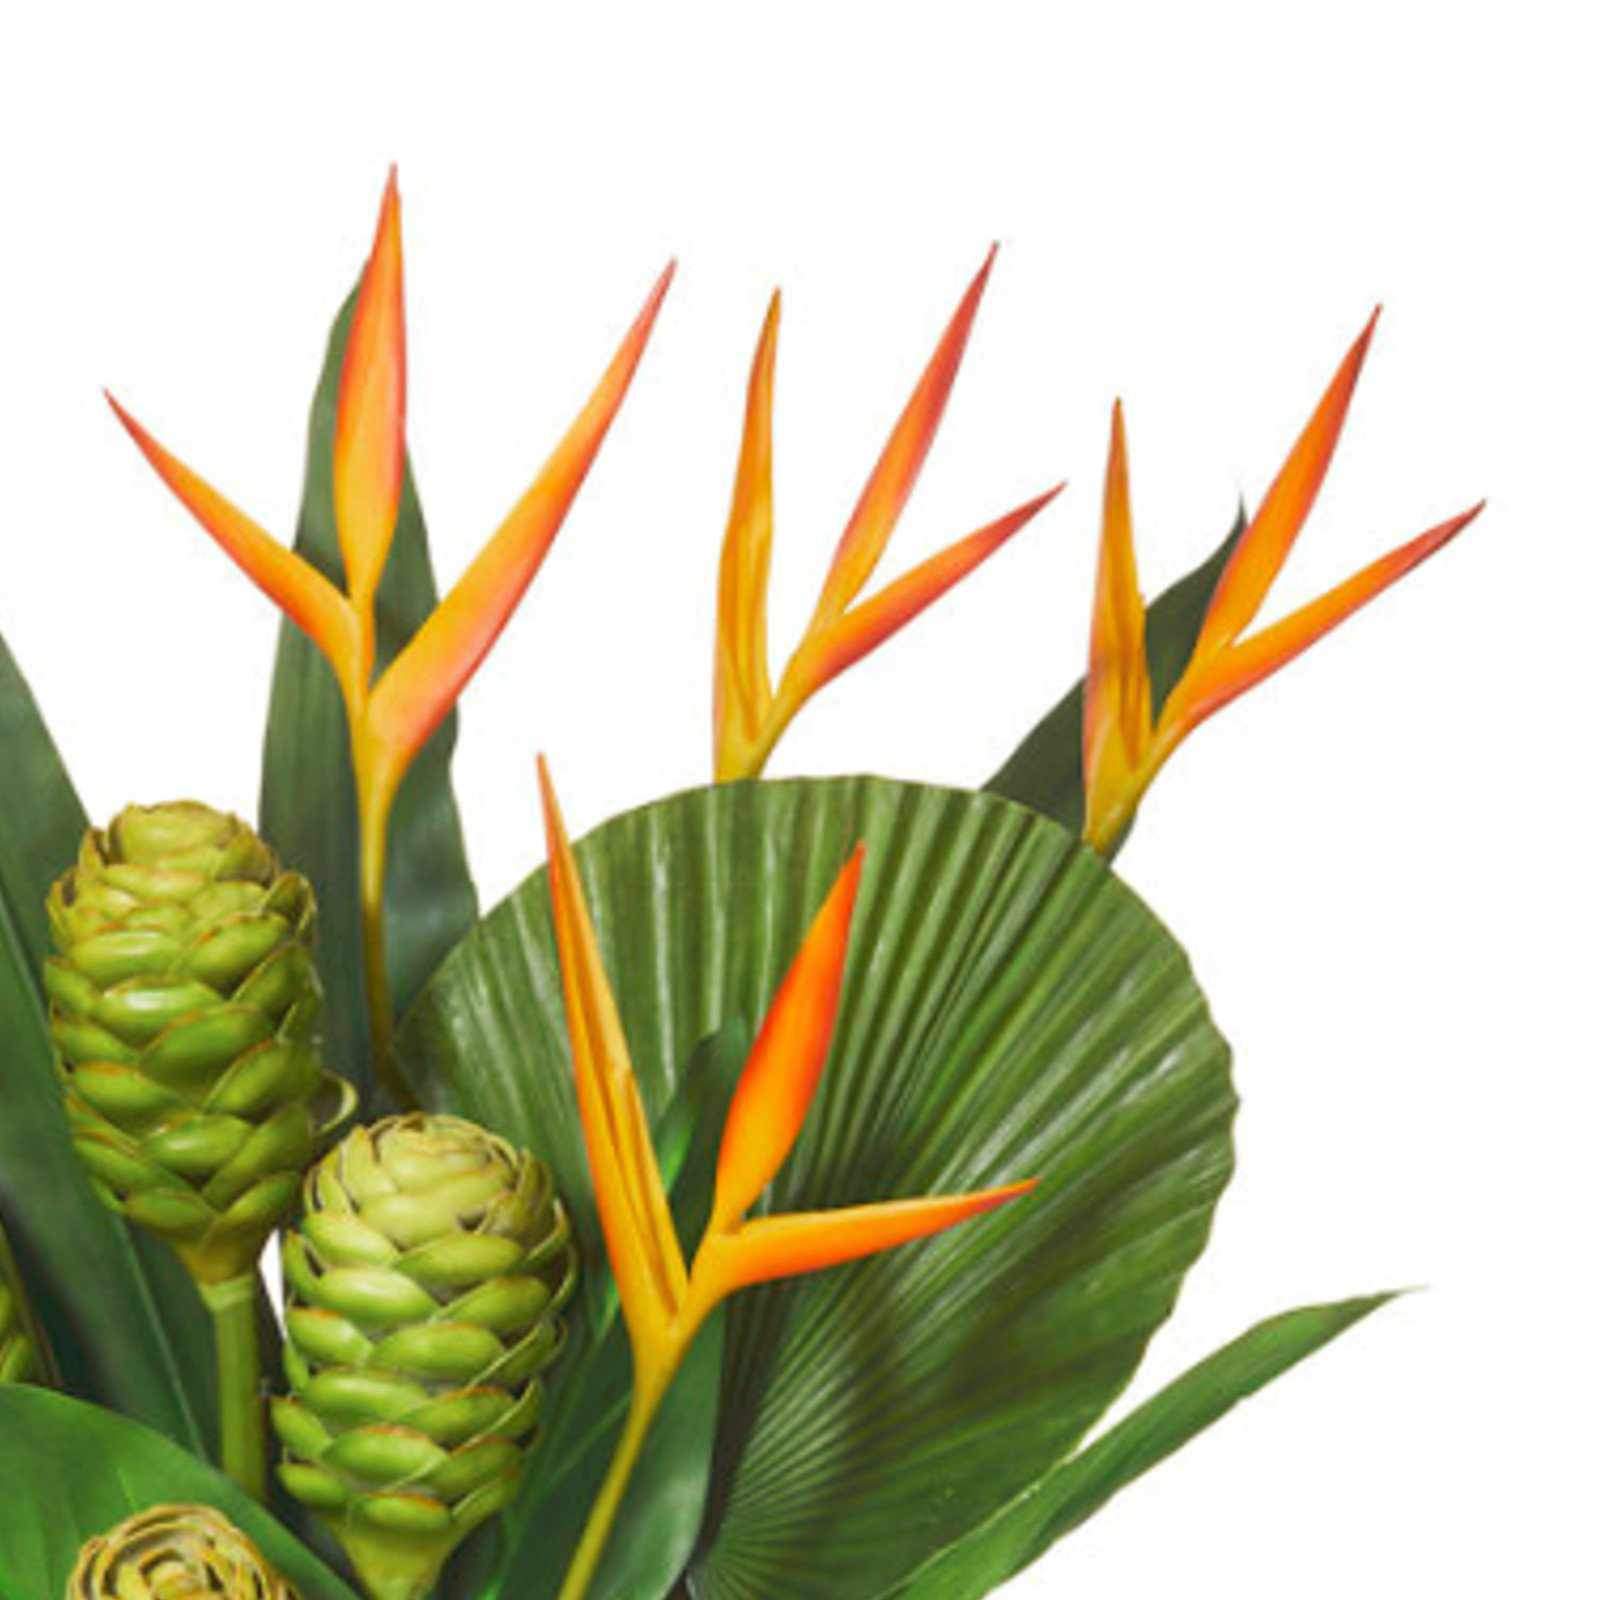 Heliconia Mix-Strata with Vase - Artificial Flower Arrangement-artificial flowers and plants-Chef's Quality Cookware